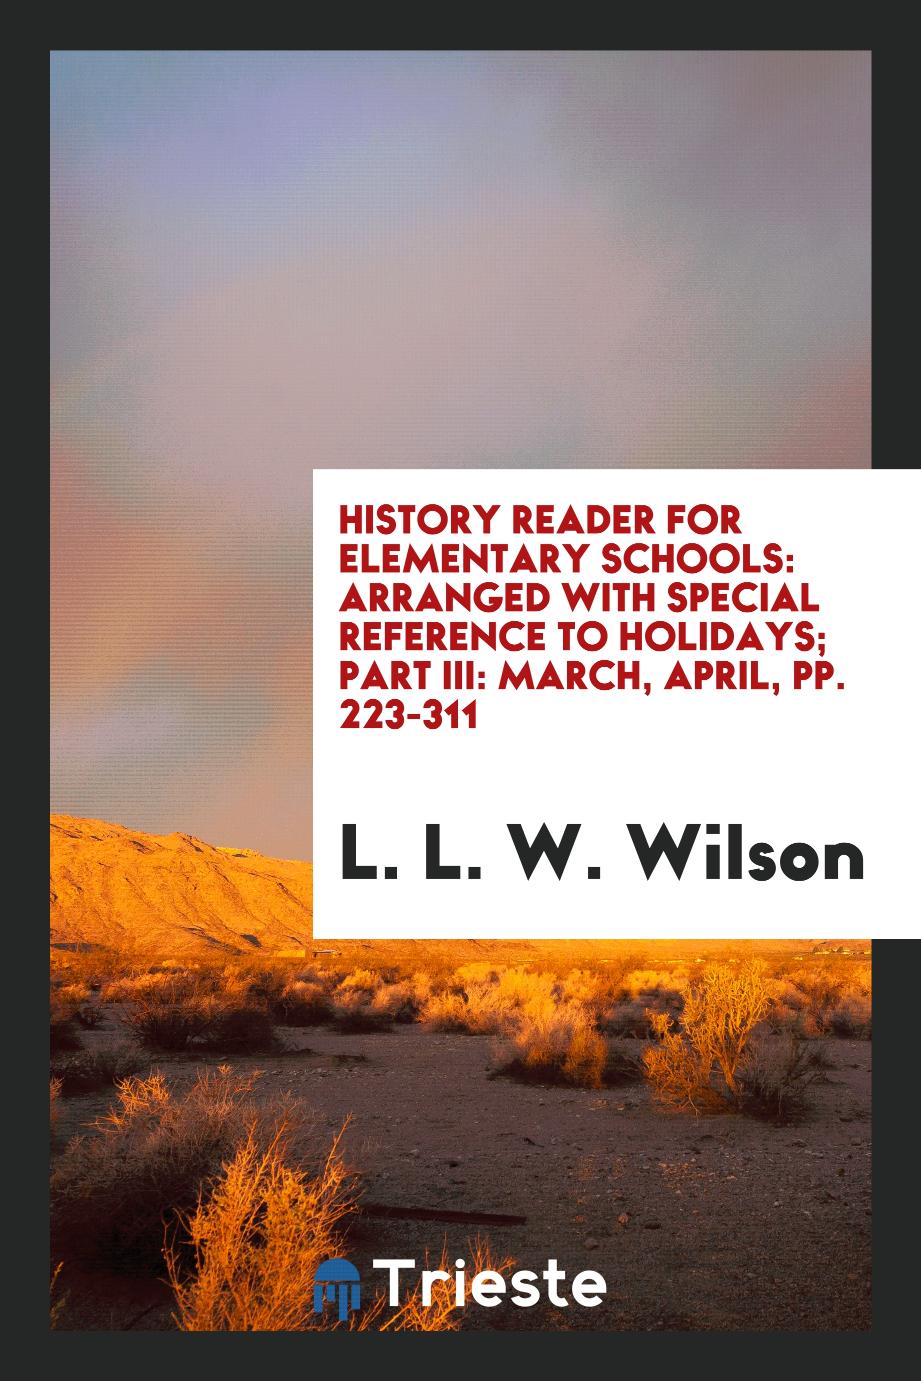 History Reader for Elementary Schools: Arranged with Special Reference to Holidays; Part III: March, April, pp. 223-311